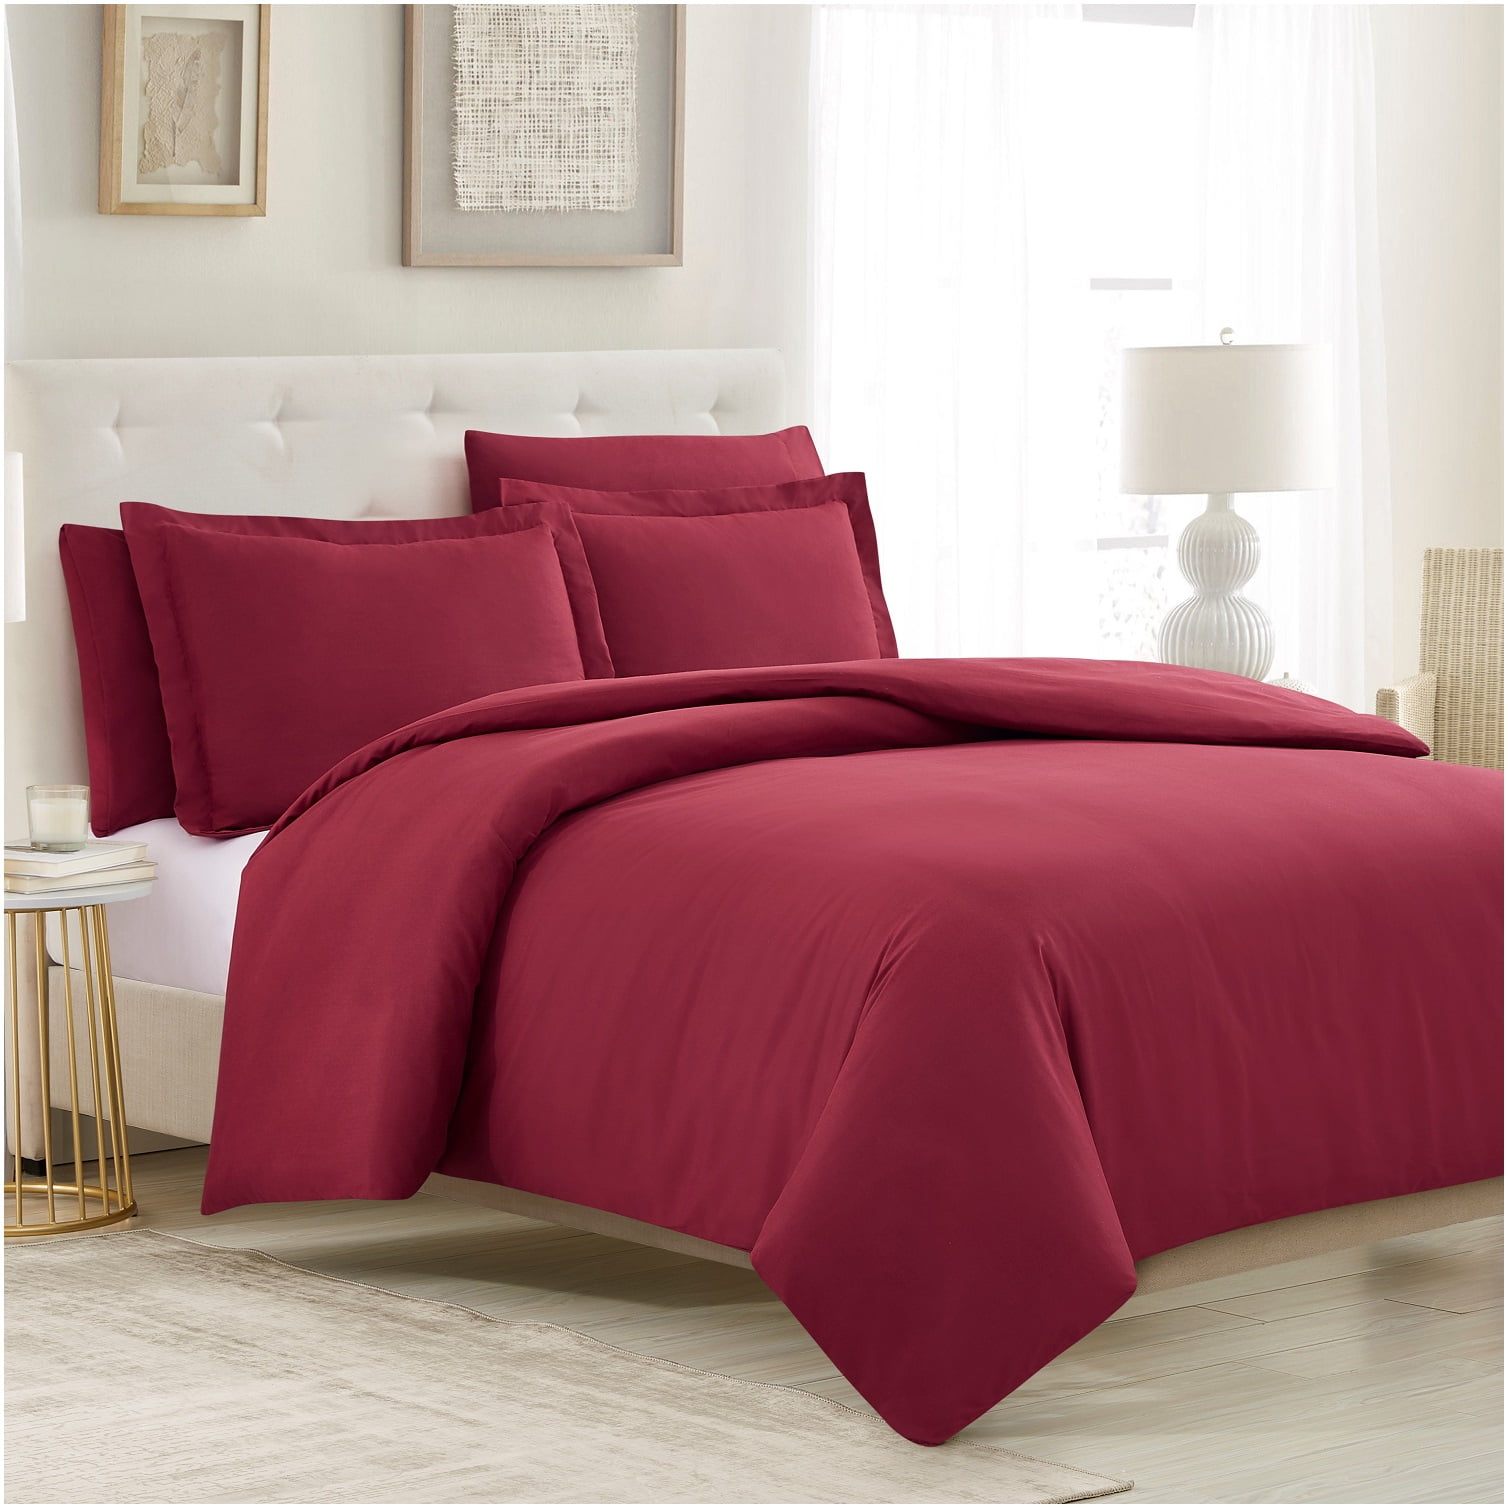 Comforter Cover with Button Closure and 2 Pillow Cases Twin Size Basic Choice 3 Piece Duvet Cover Set Ultra Soft Microfiber Hotel Luxury Collection Burgundy